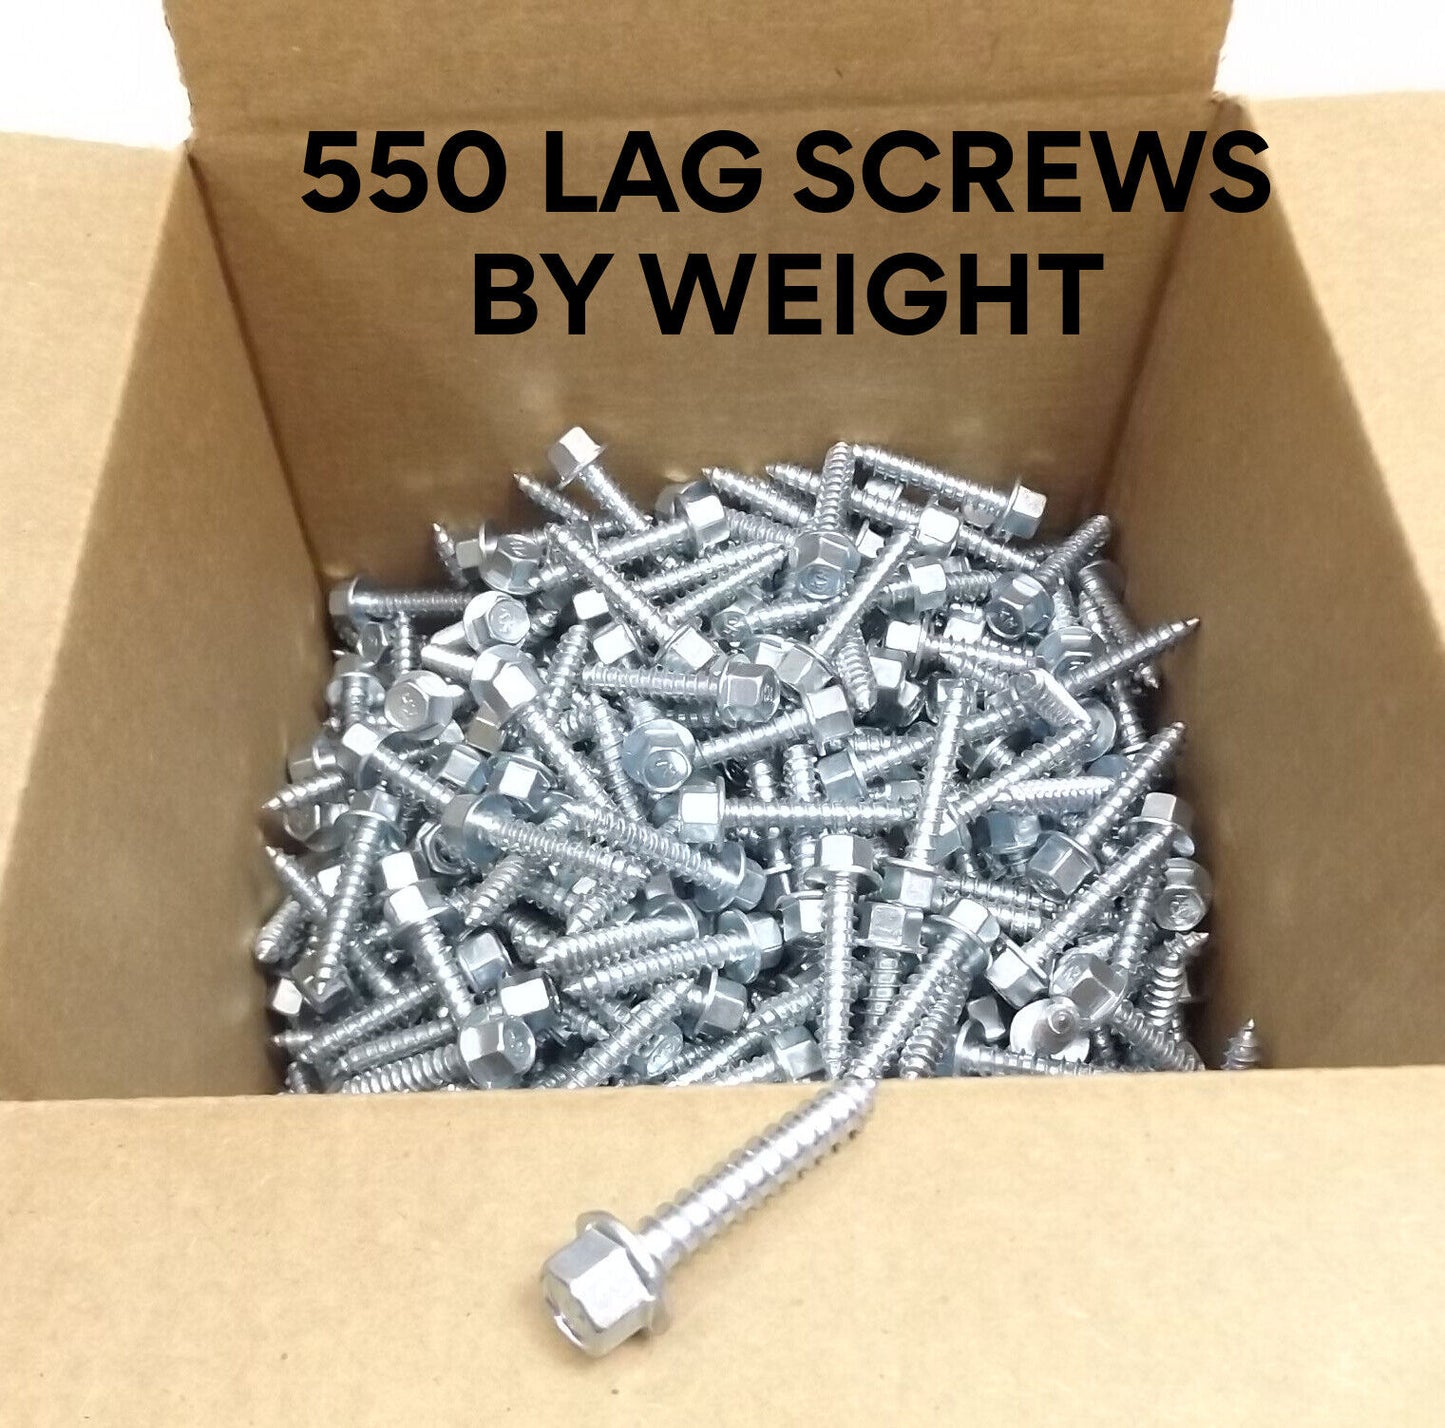 BOX OF 550 KH LAG SCREW 1/4" X 1-1/2" WASHER HEX HEAD LONG HEAD PLATED